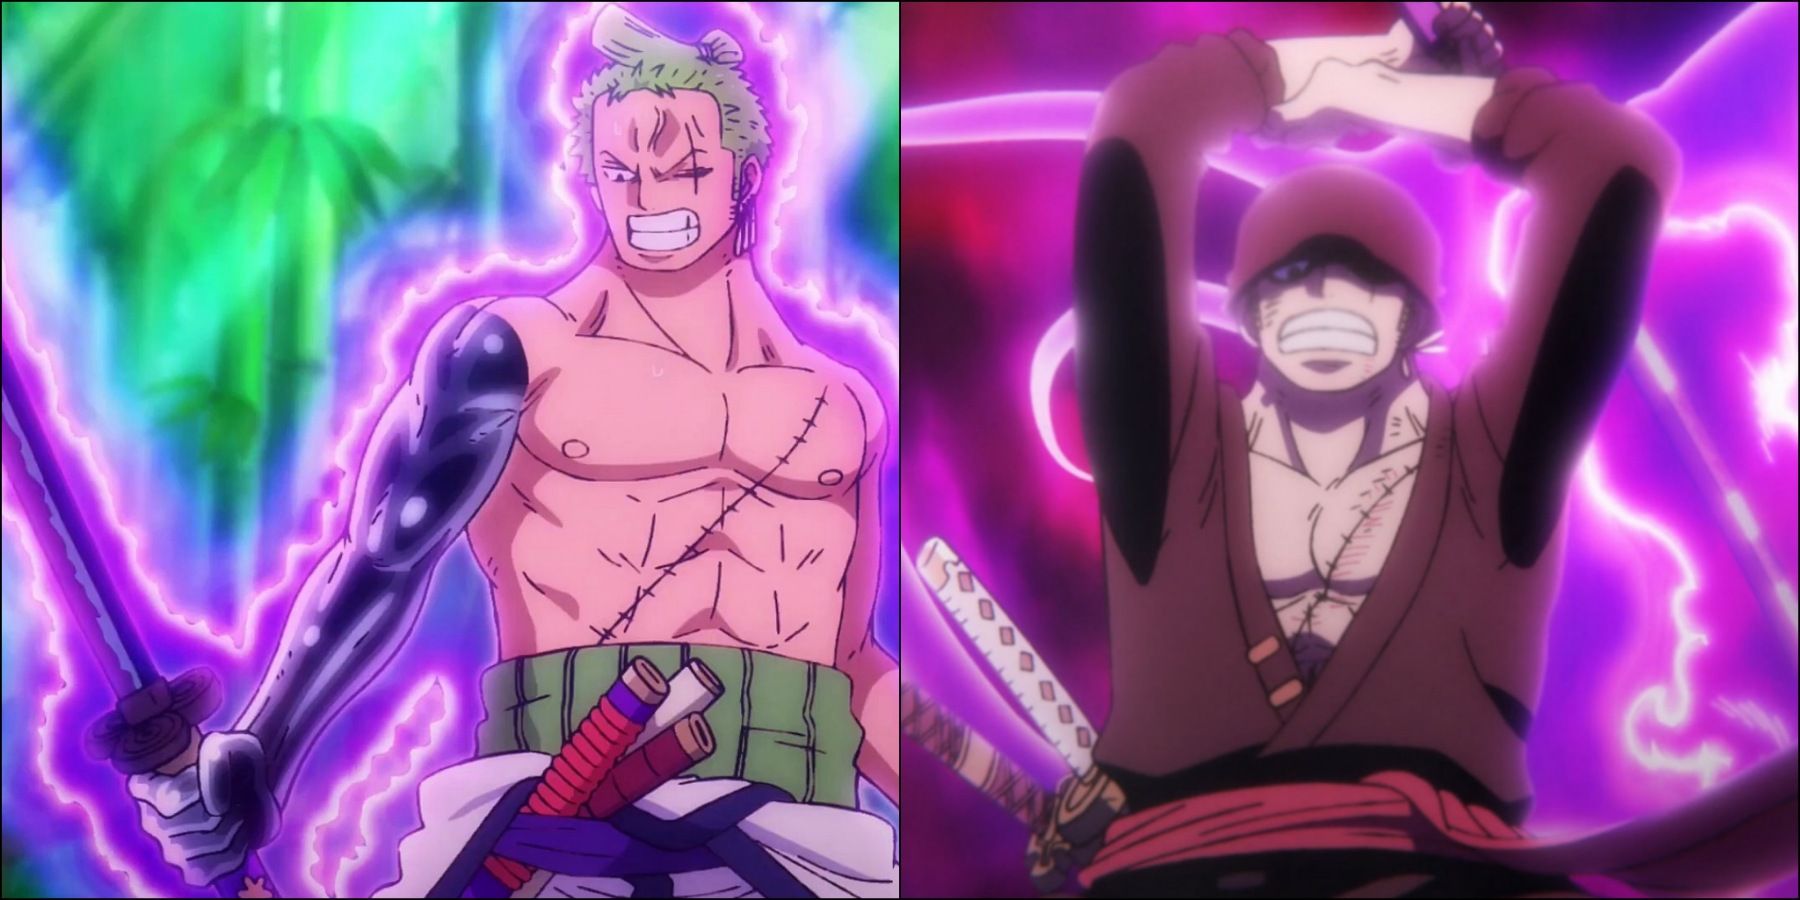 How is Enma a power up for Zoro? - Quora